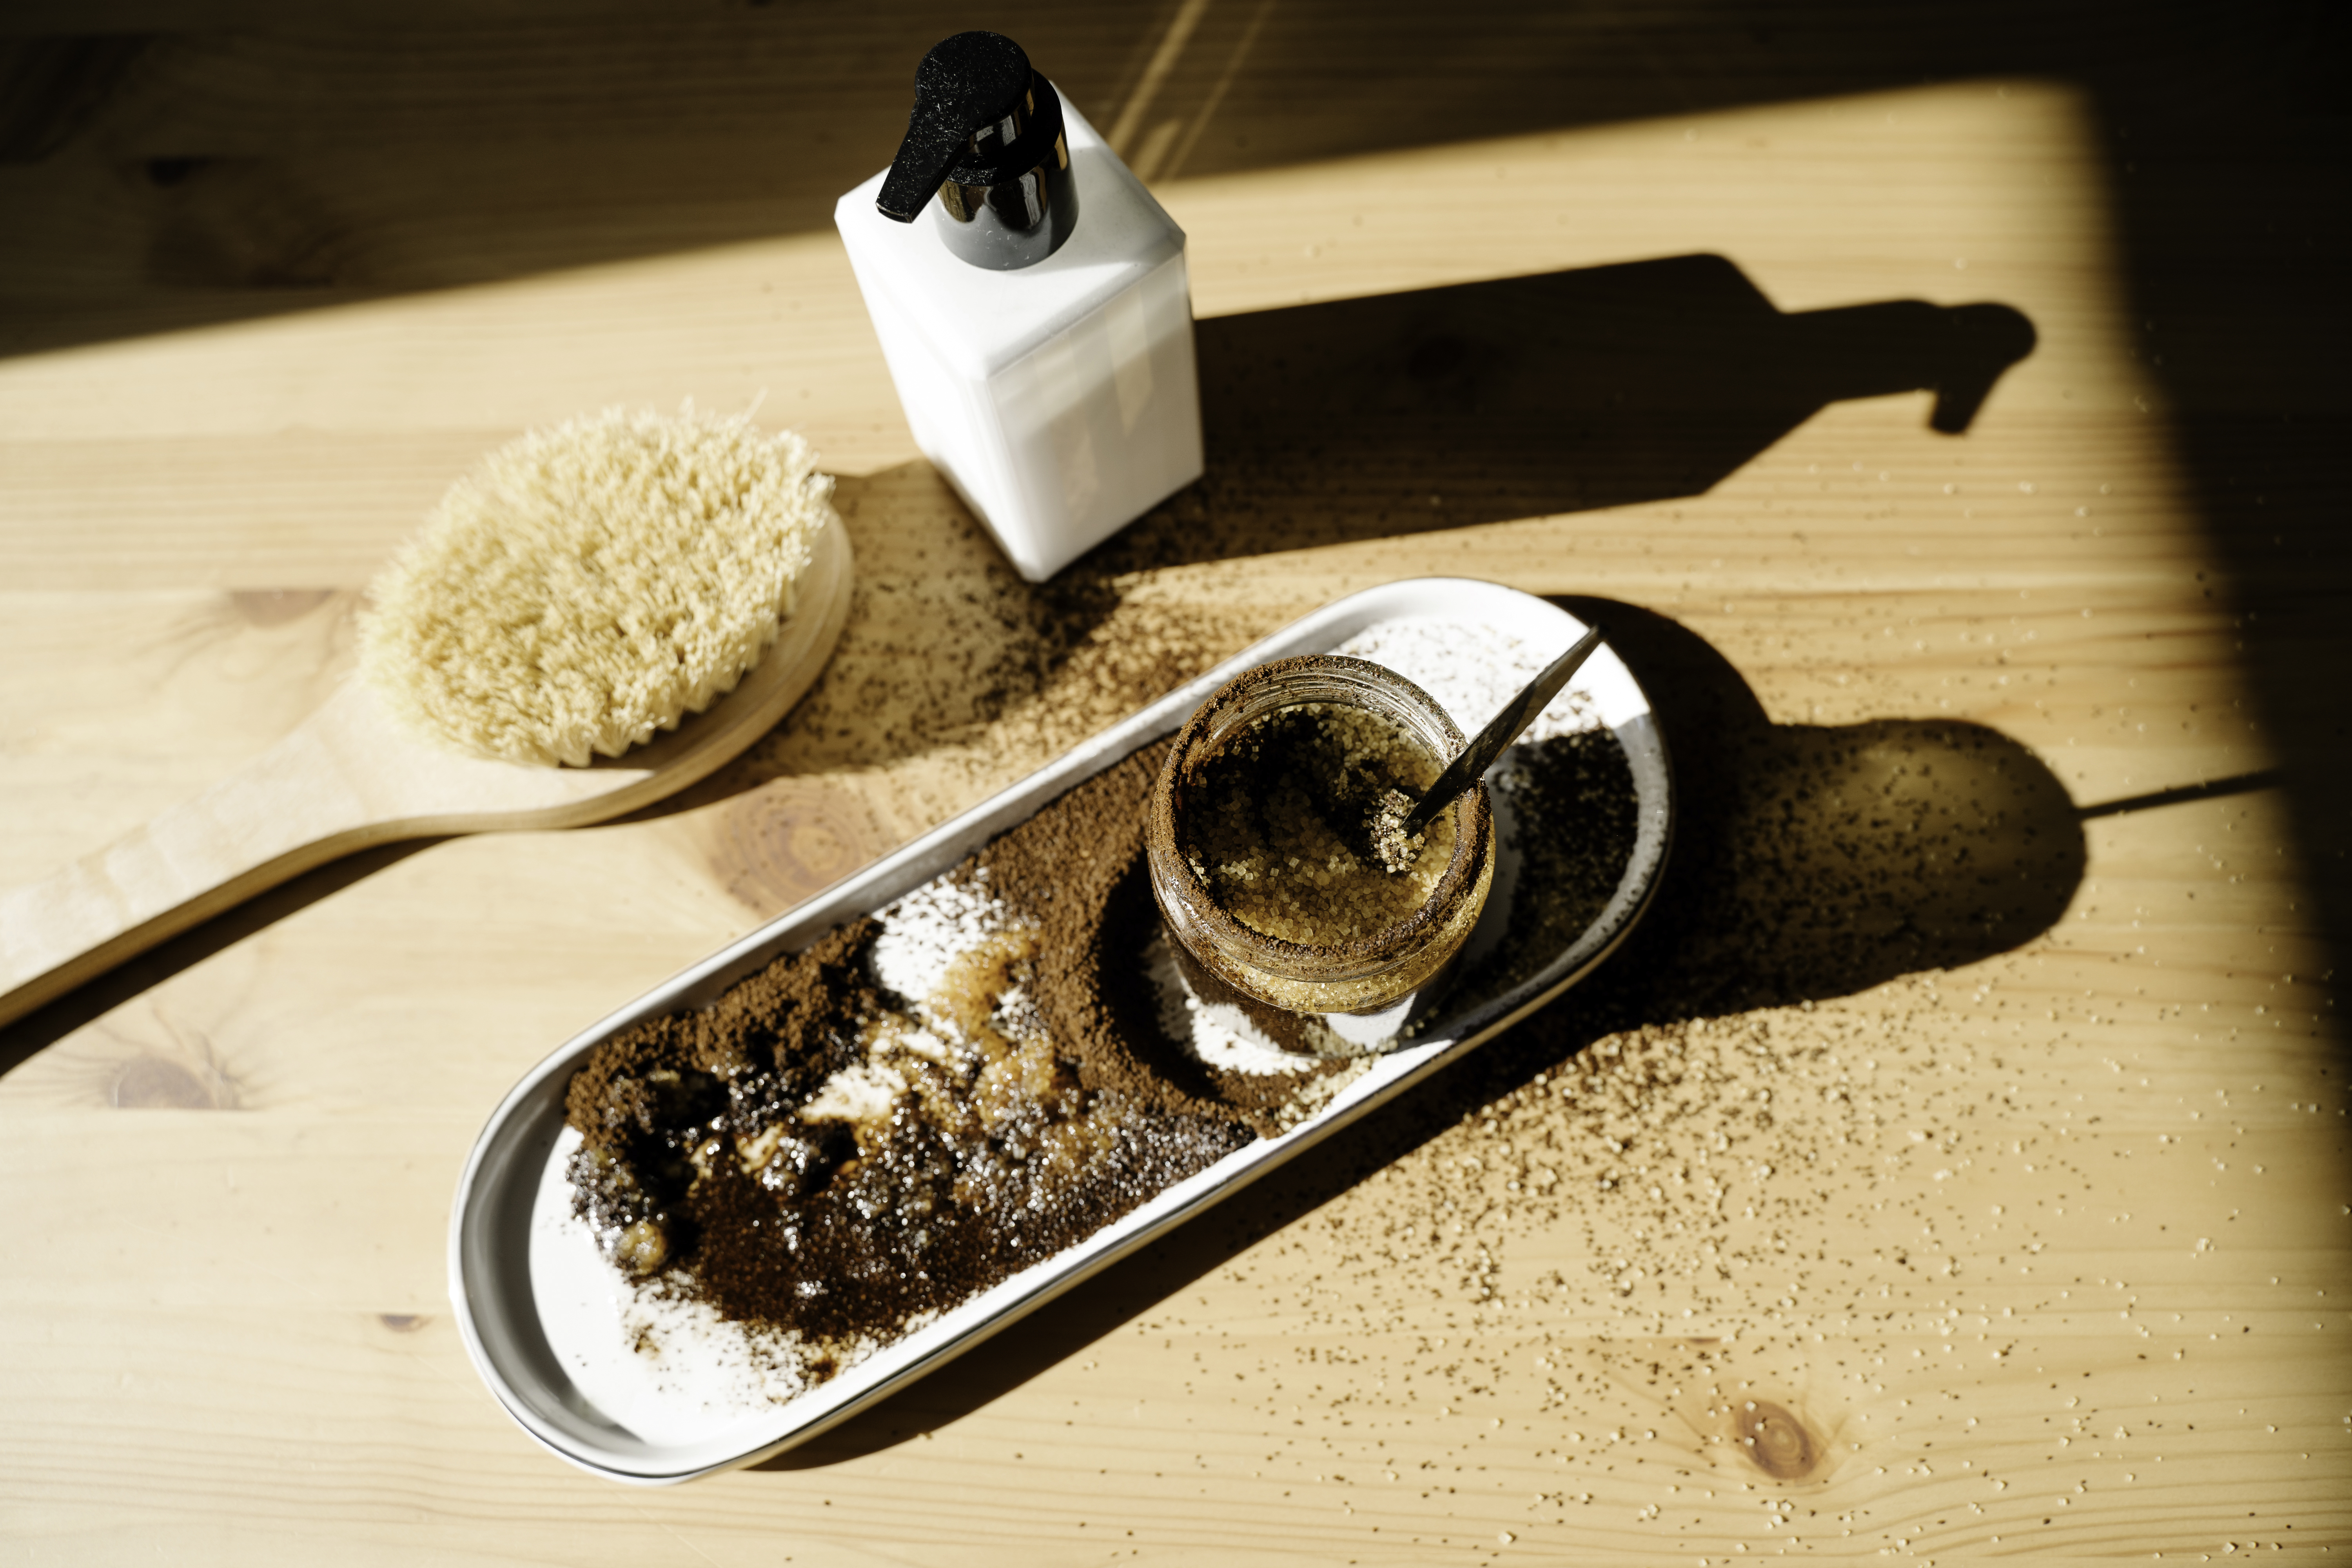 The ingredients for a homemade coffee scrub, laid out on a wooden table.